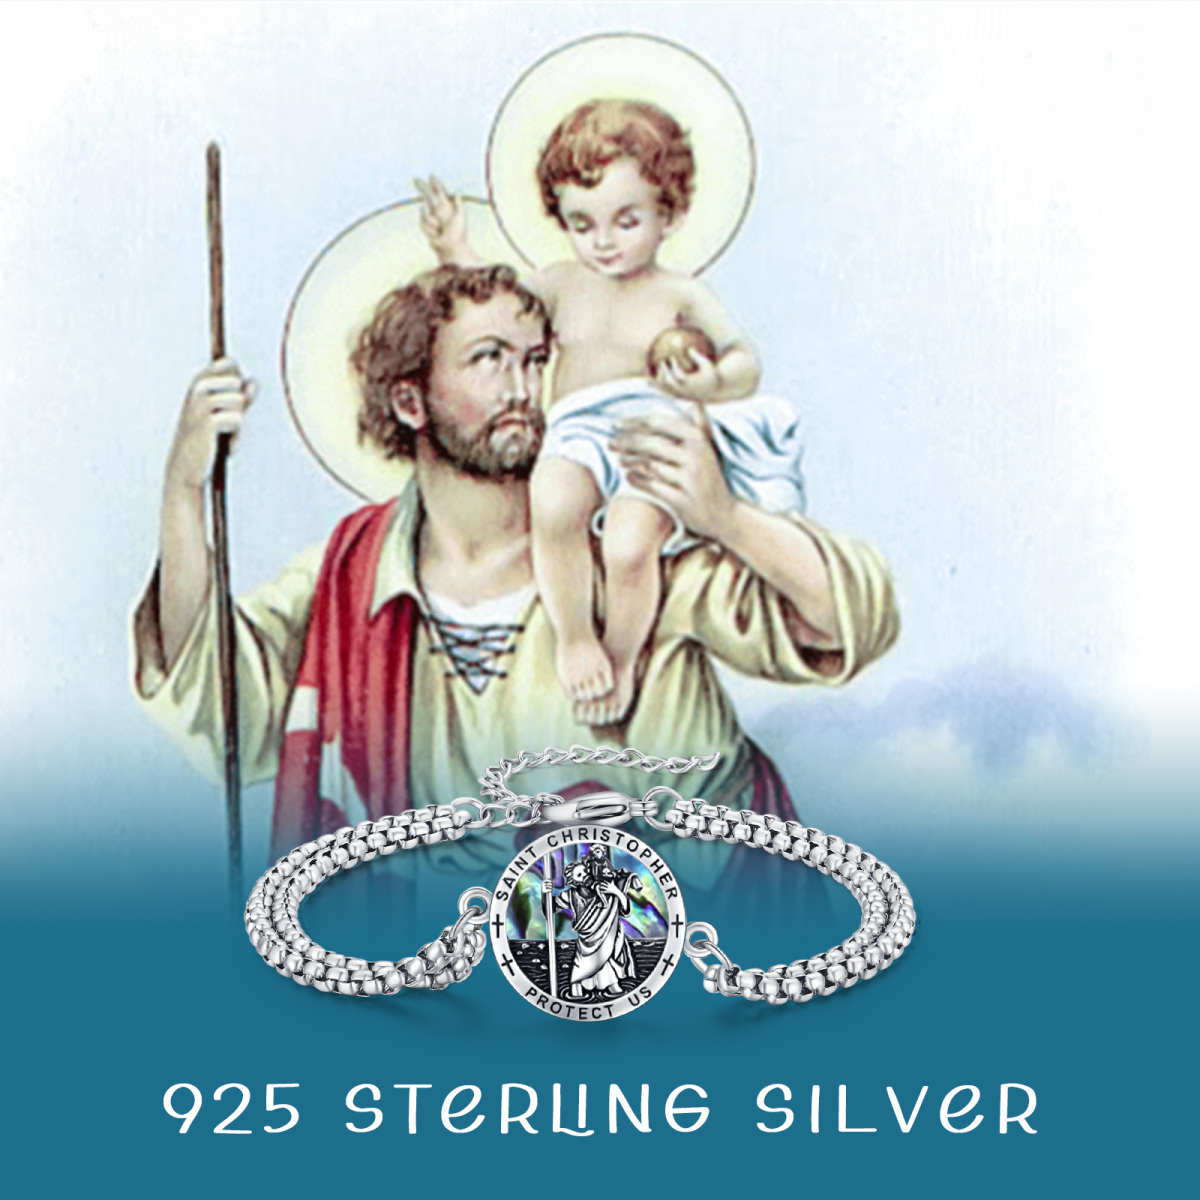 Sterling Silver Oval Abalone Shellfish Saint Christopher Pendant Bracelet with Engraved Word-7